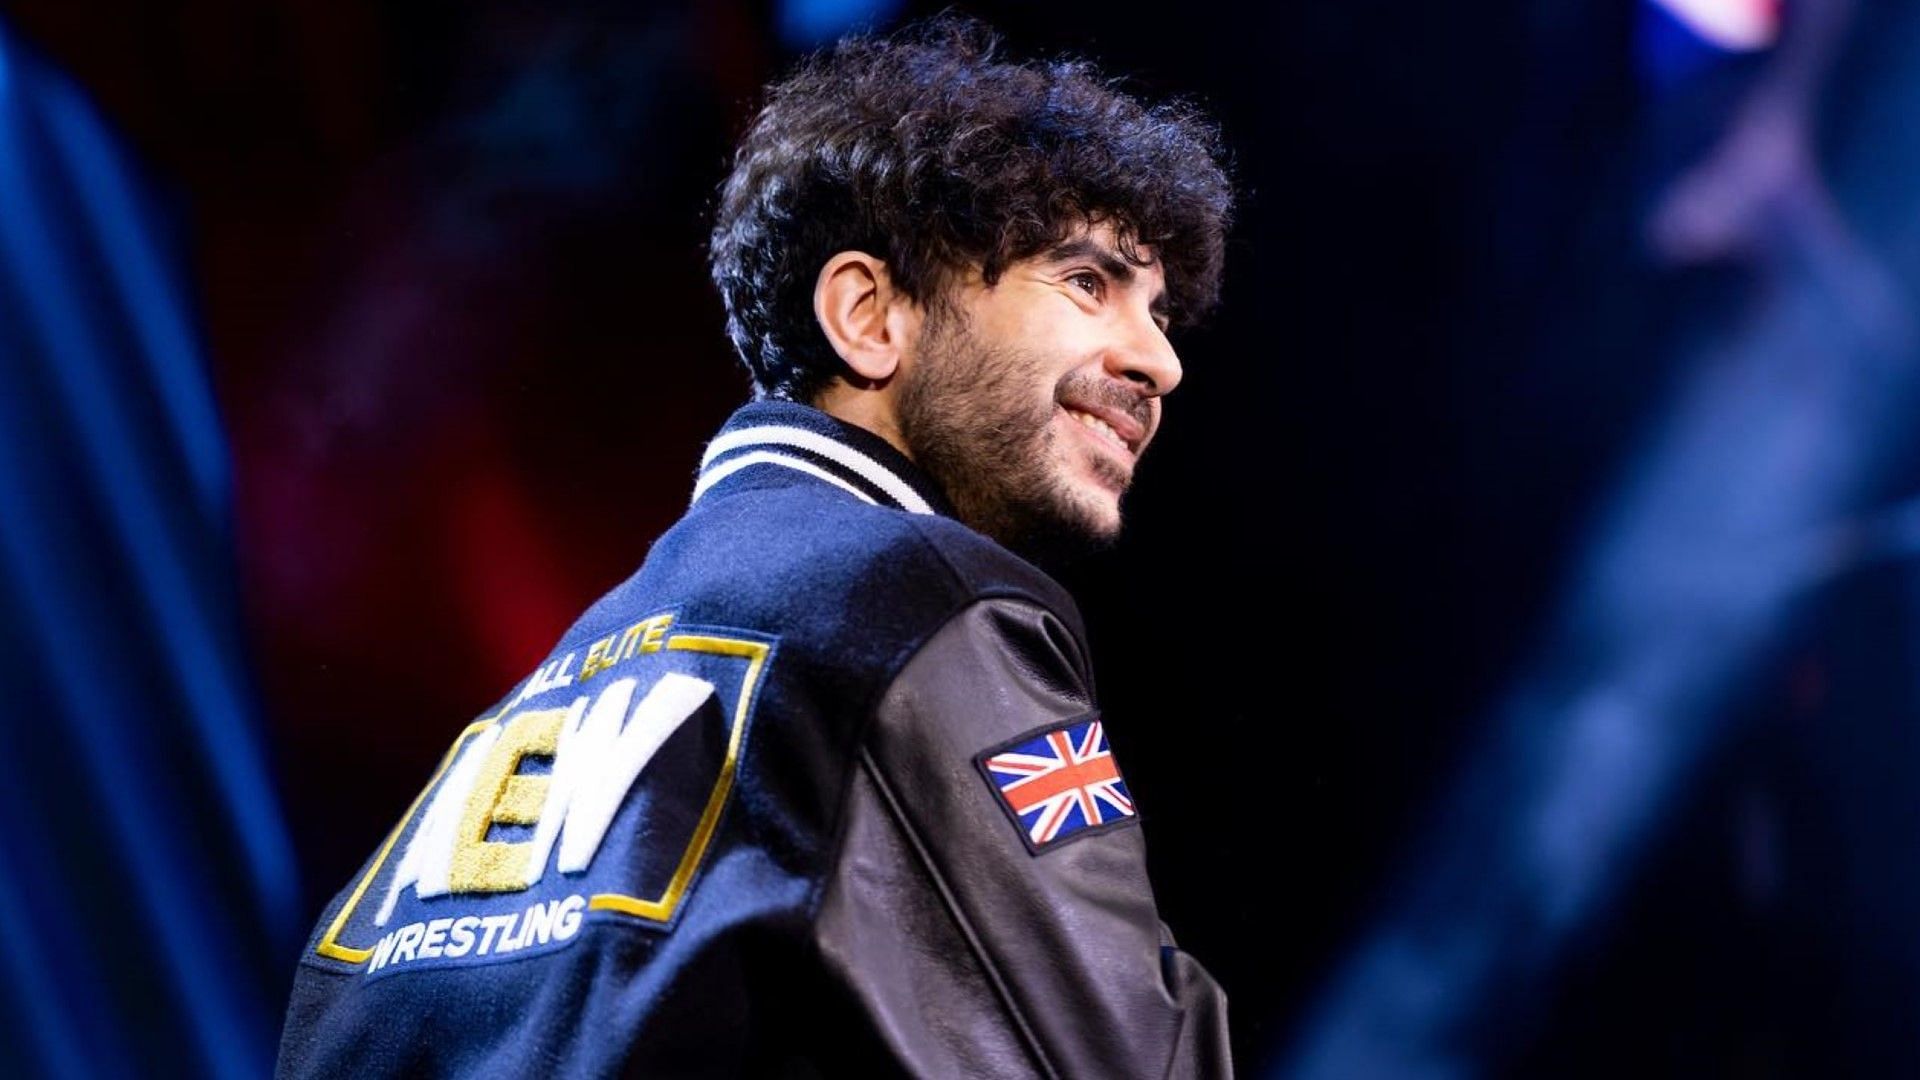 AEW President Tony Khan is all smiles at Daily